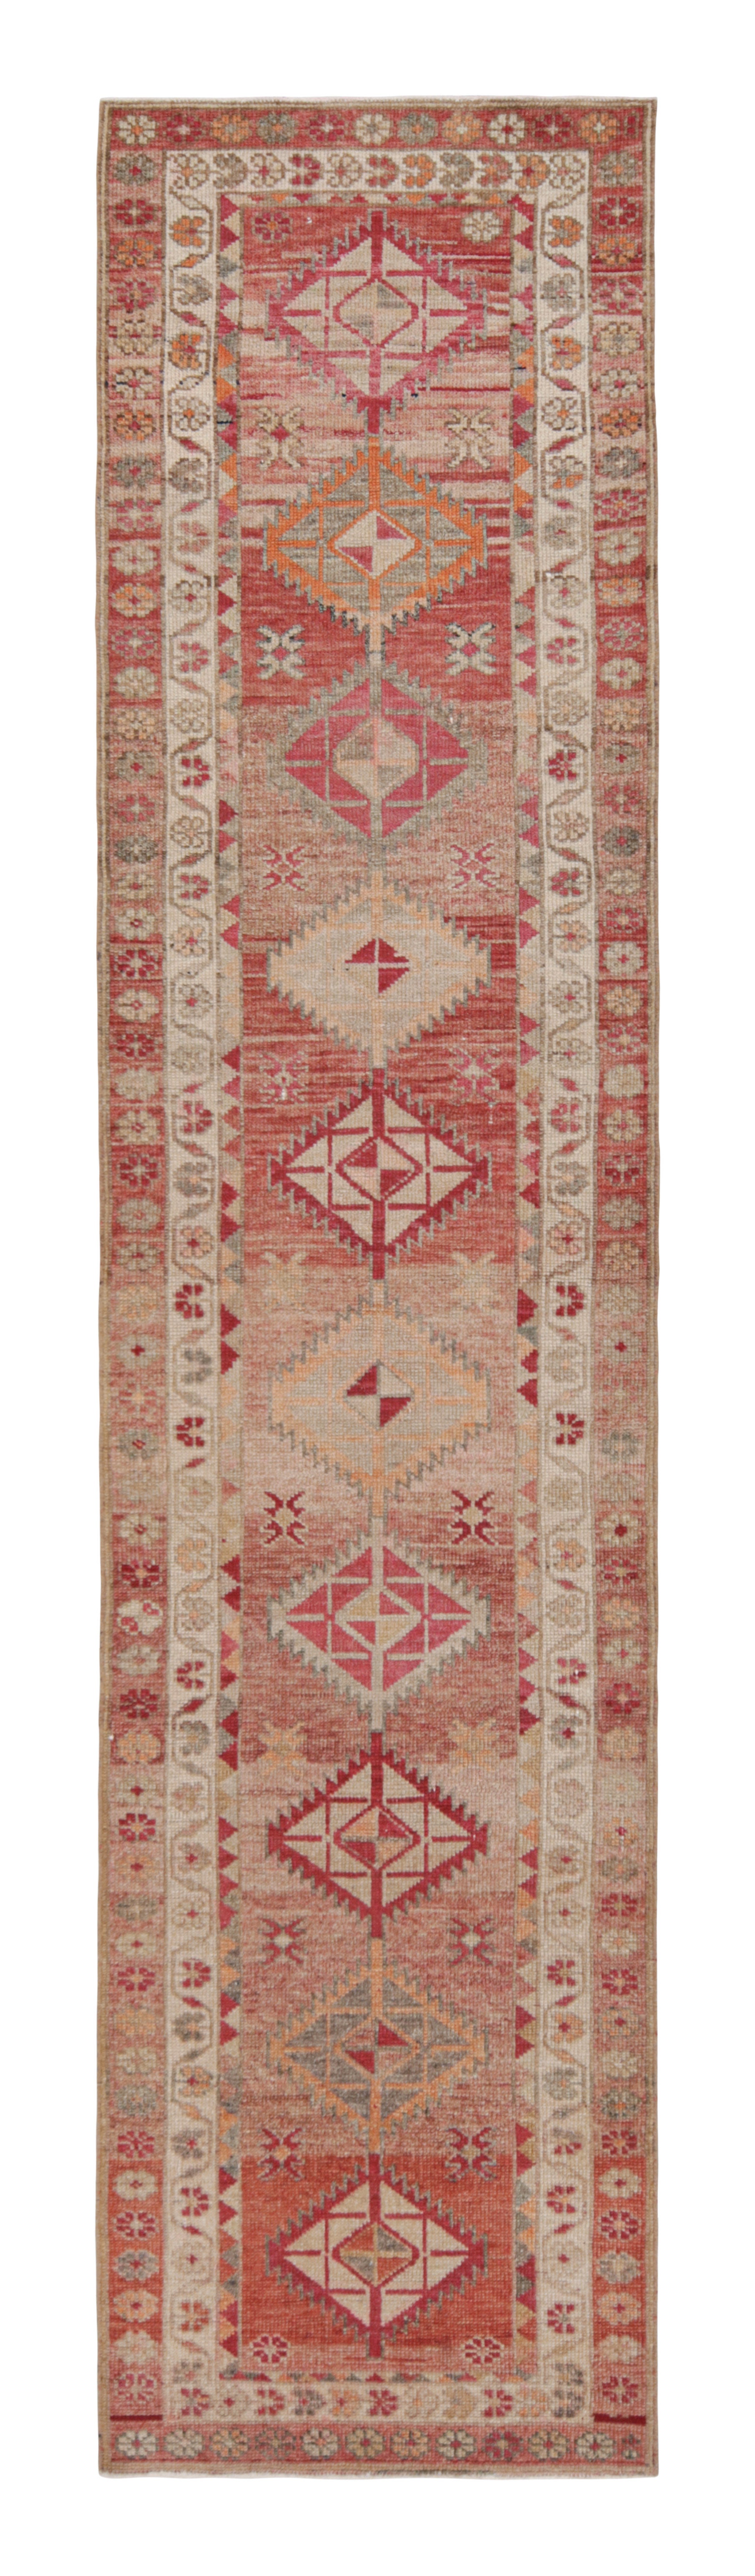 Hand-Knotted Vintage Runner, Red-Pink Rug in Geometric Pattern by Rug & Kilim